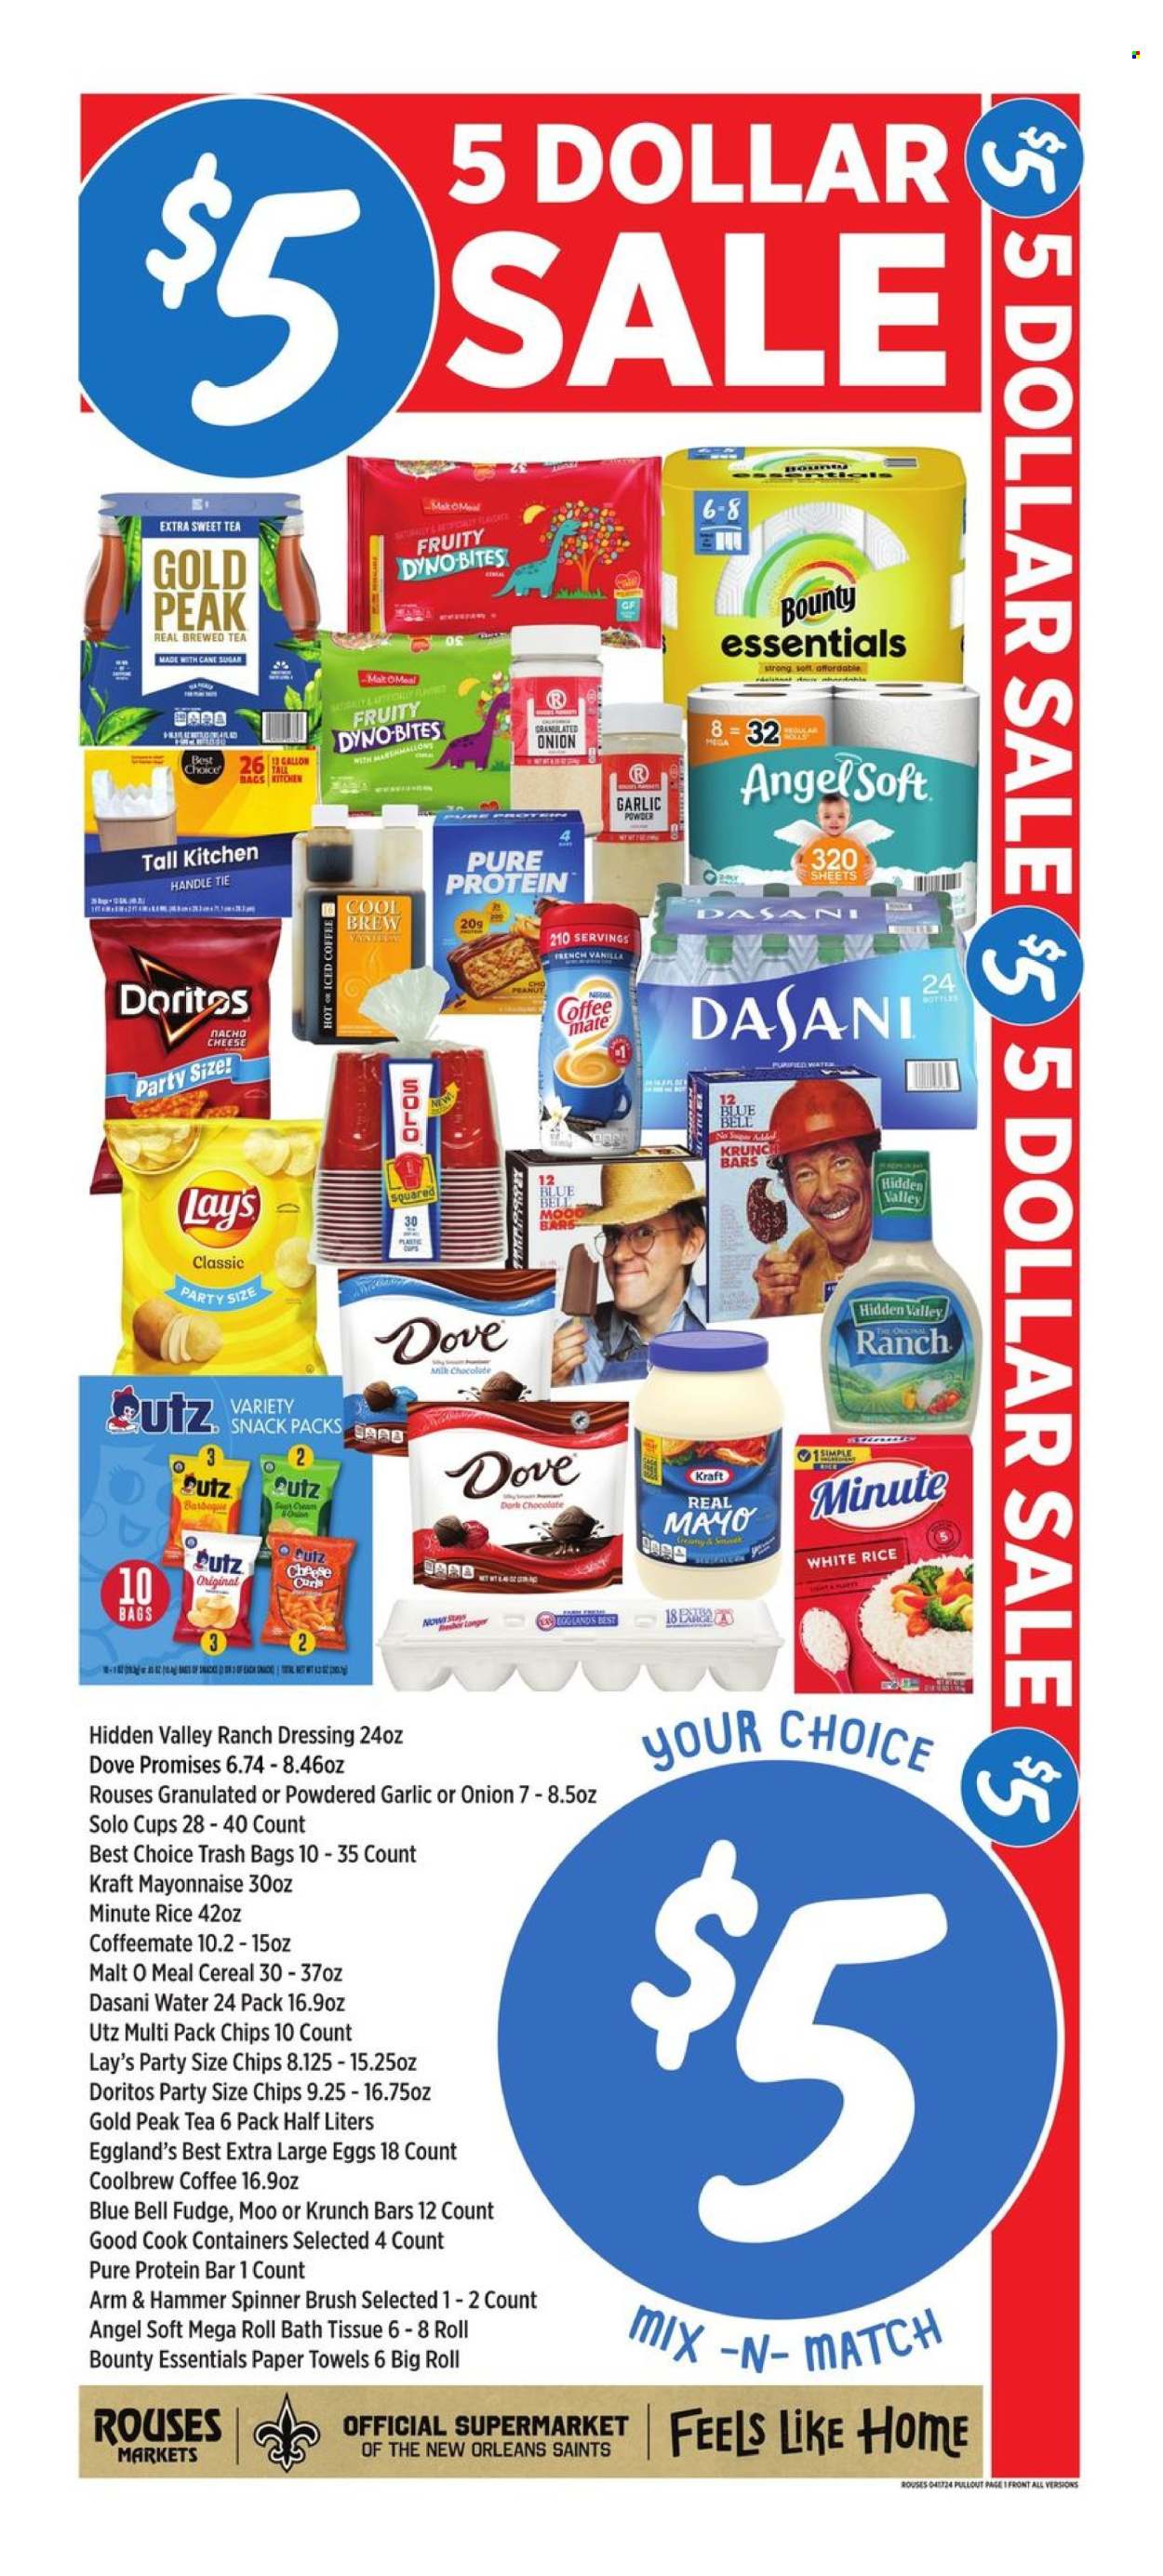 Rouses Markets ad  - 04.17.2024 - 04.24.2024.